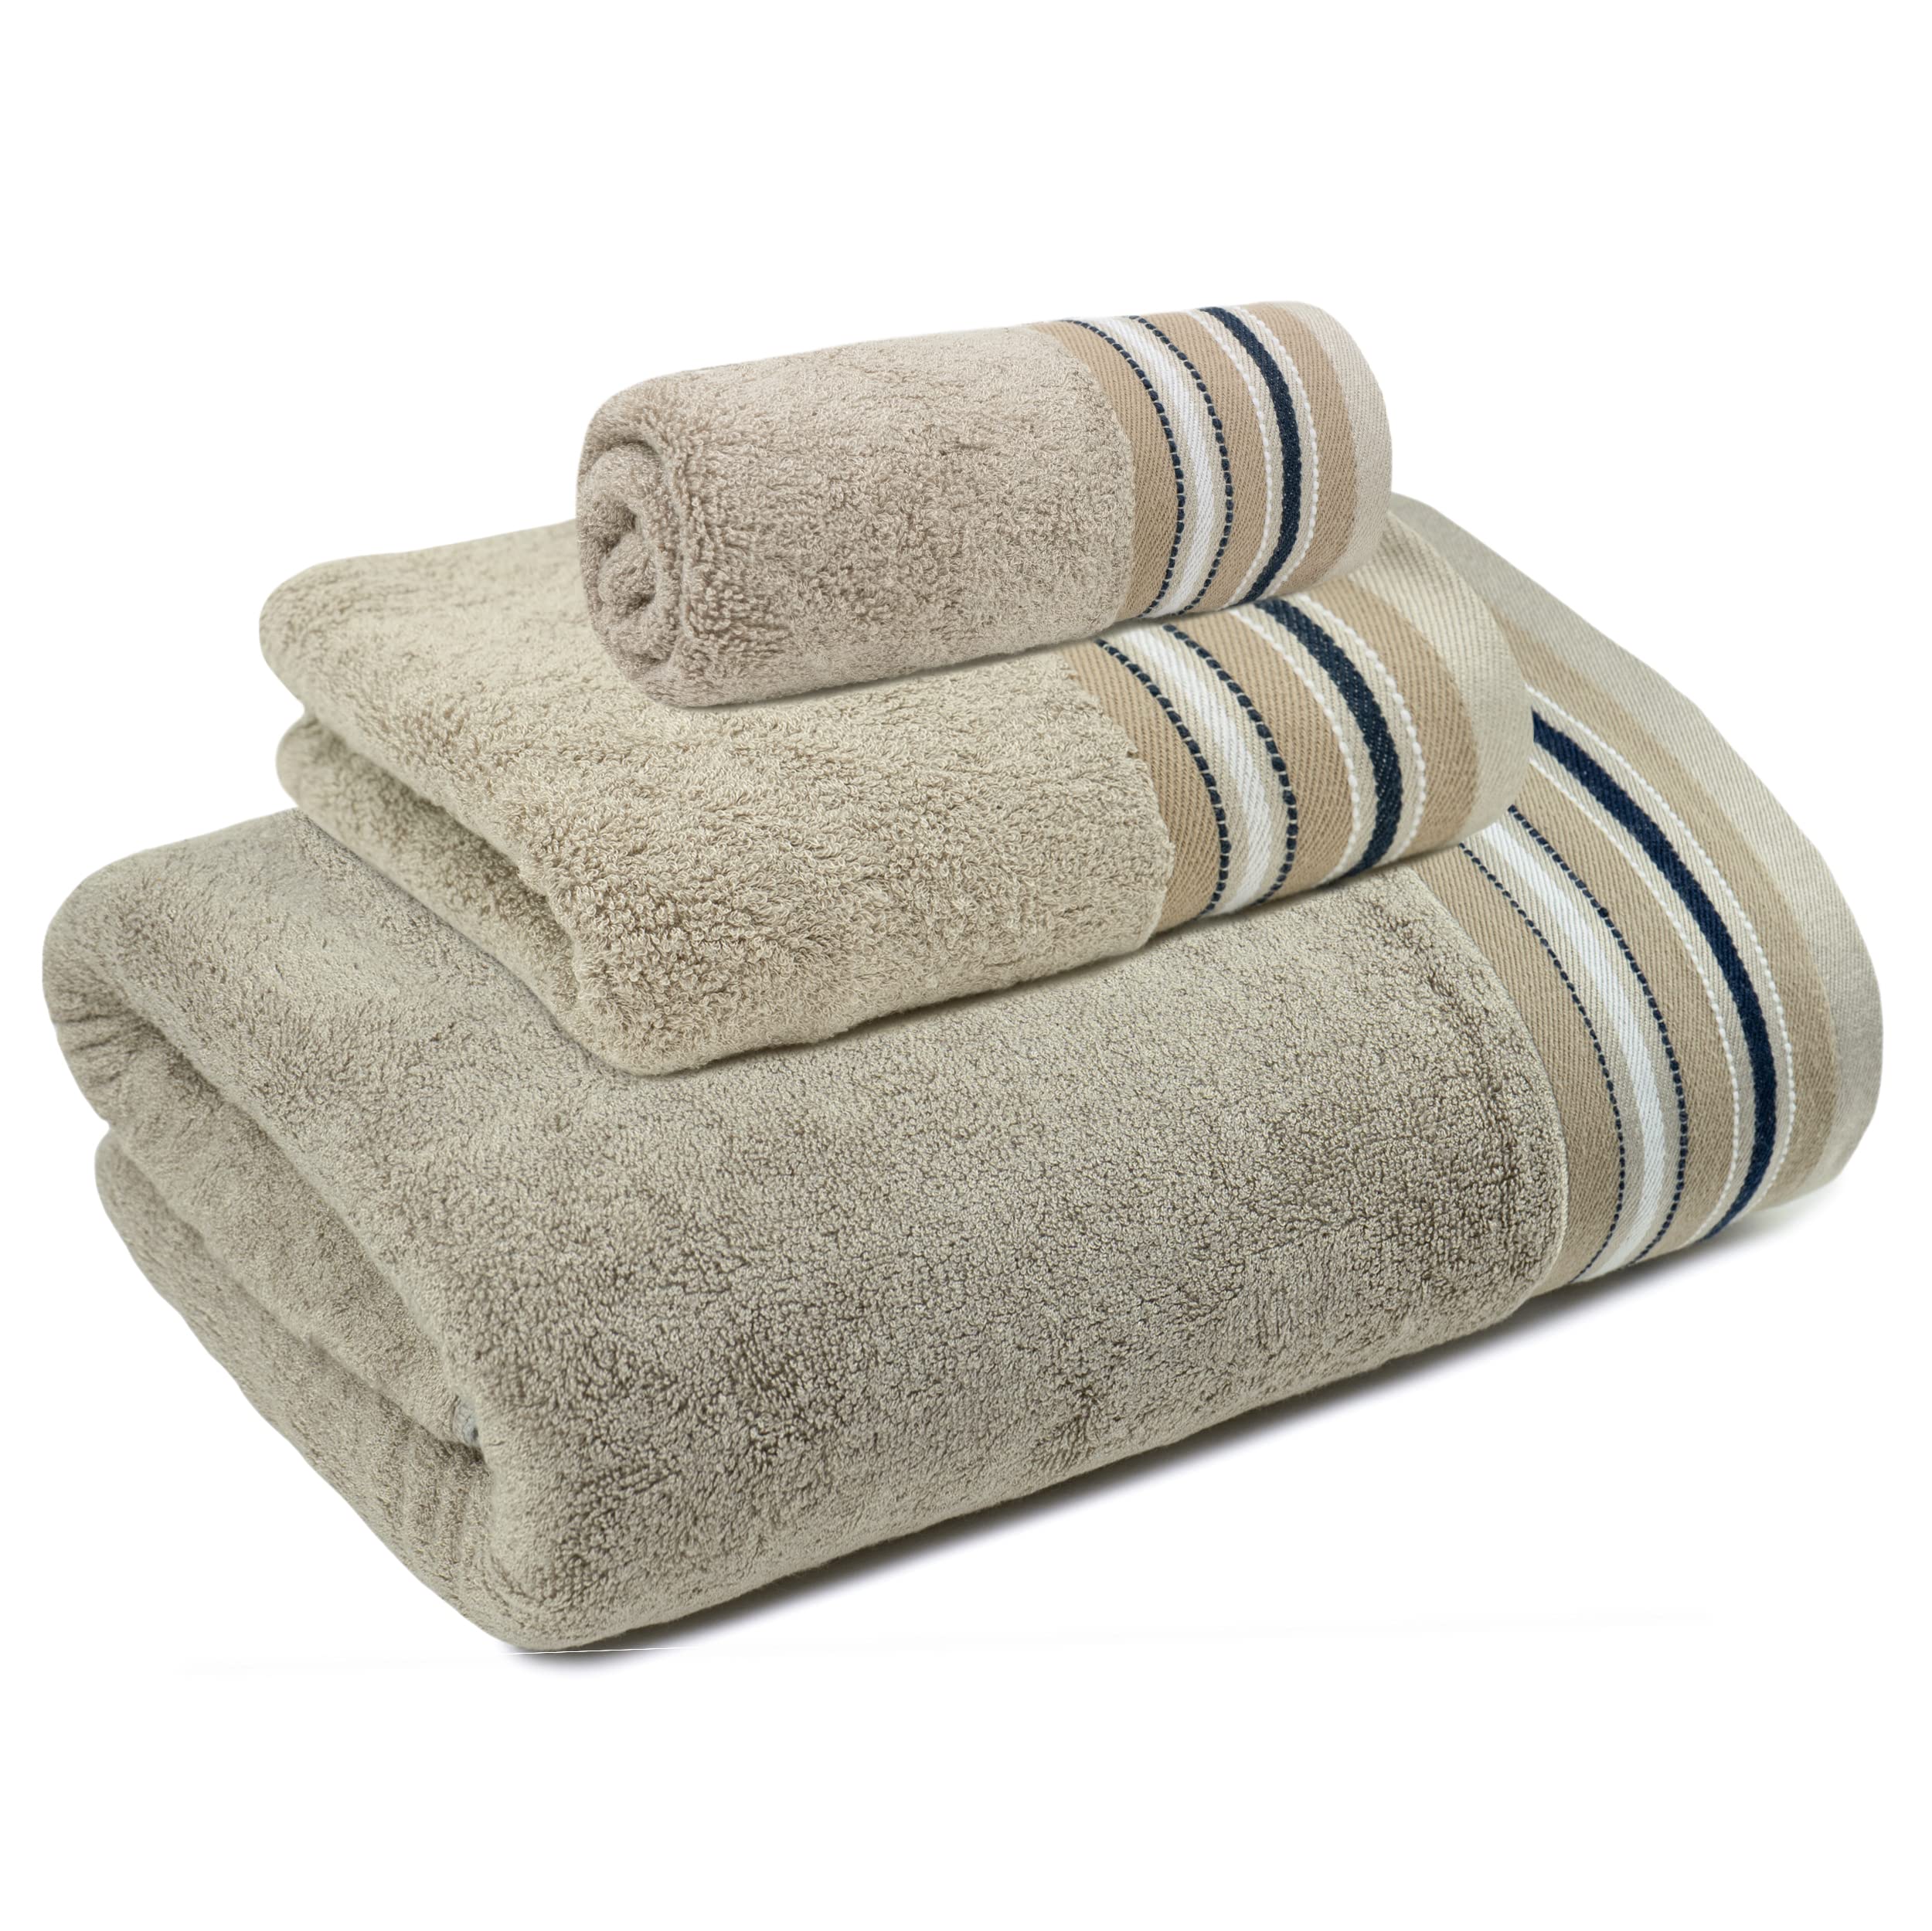 Mush Designer Bamboo Towelset |Ultra Soft, Absorbent & Quick Dry Towel for Bath, Beach, Pool, Travel, Spa and Yoga (3 Pieces Towelset, Royal Beige)